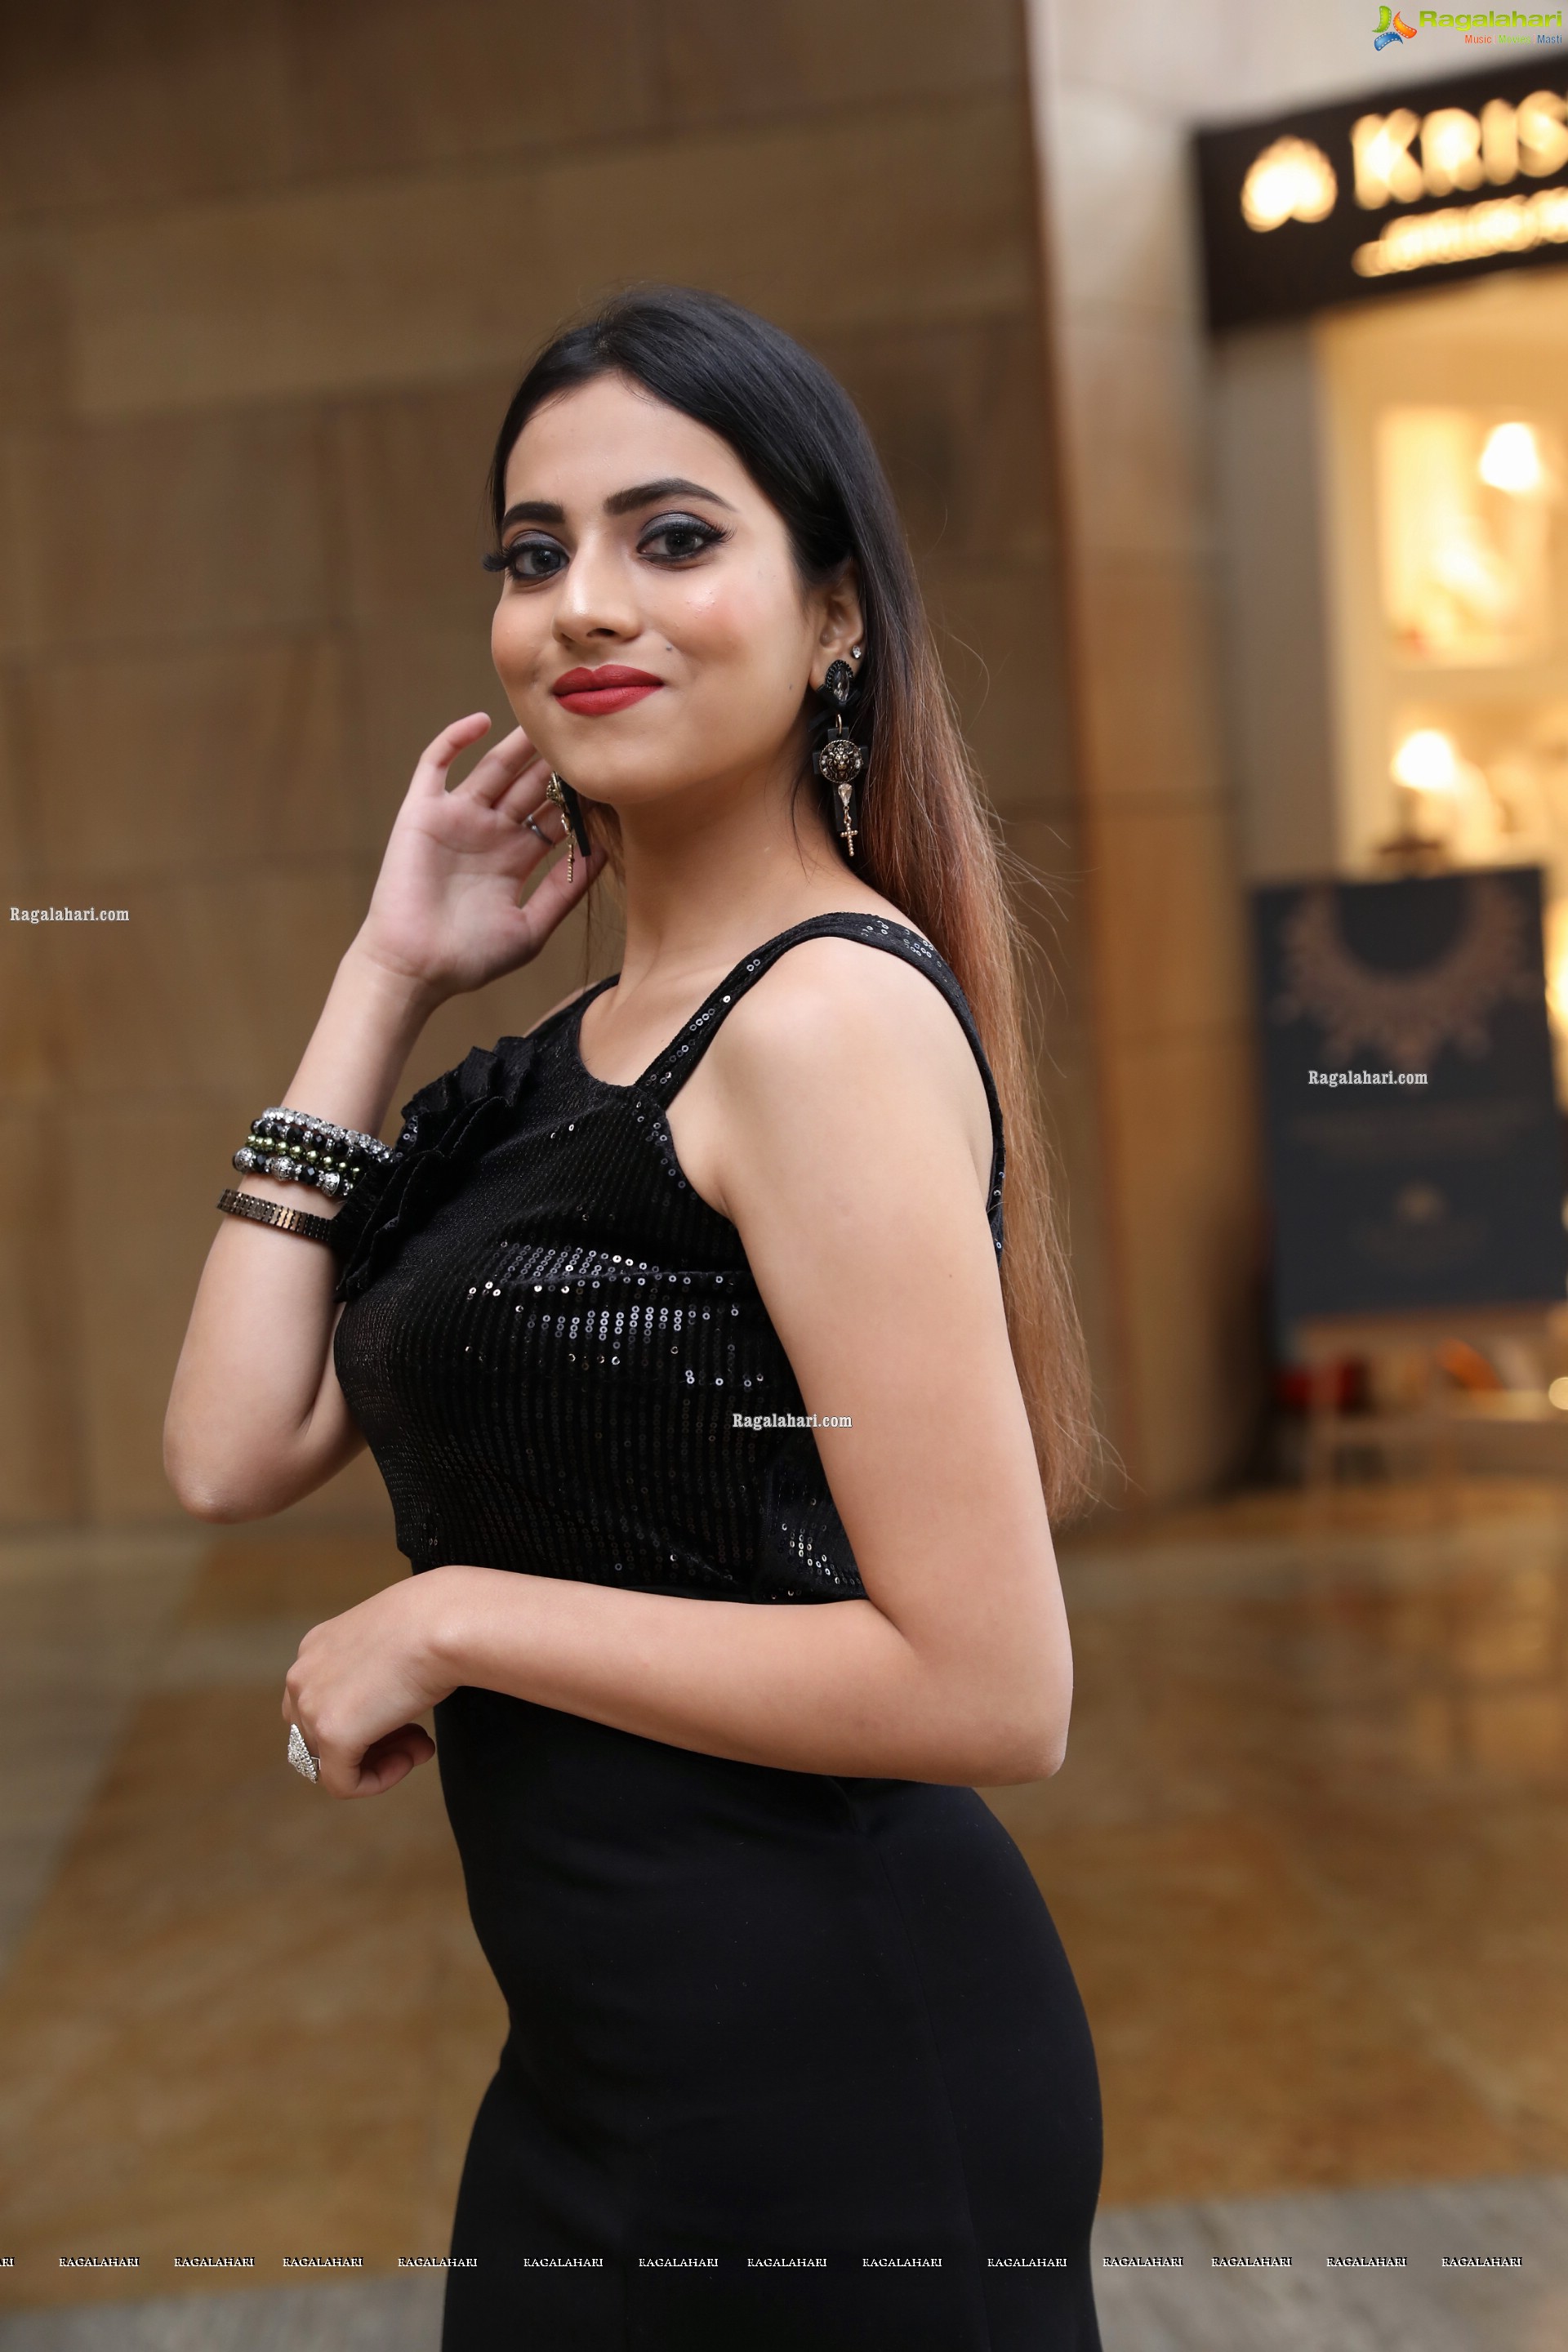 Dimple Thakur Front Slit Bodycon Dress, HD Photo Gallery